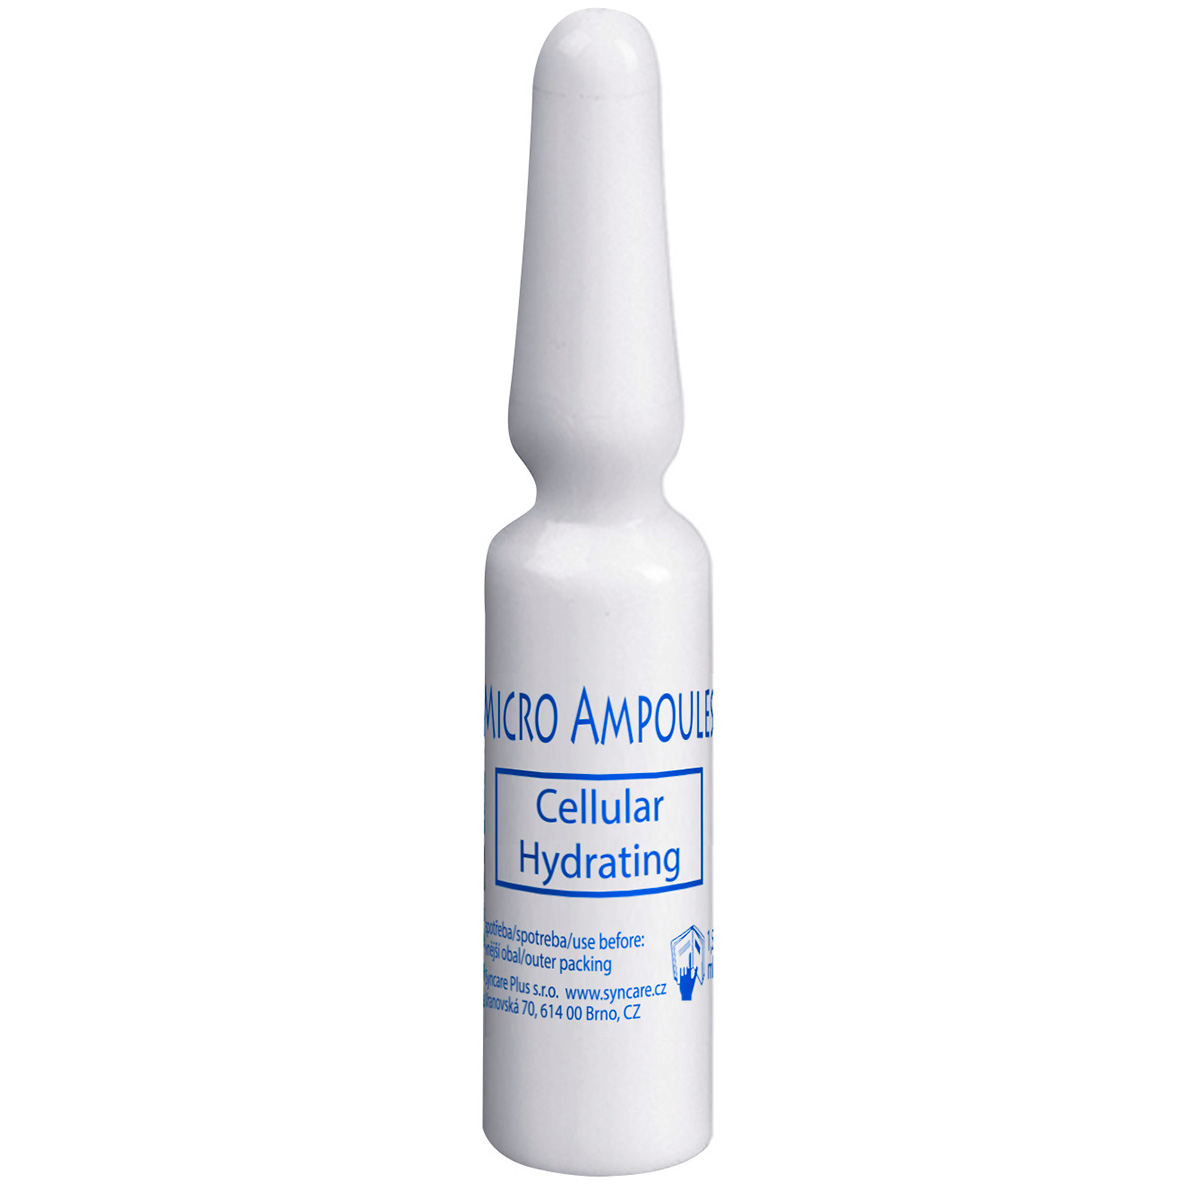 SynCare - Micro Ampoules Cellular Hydrating